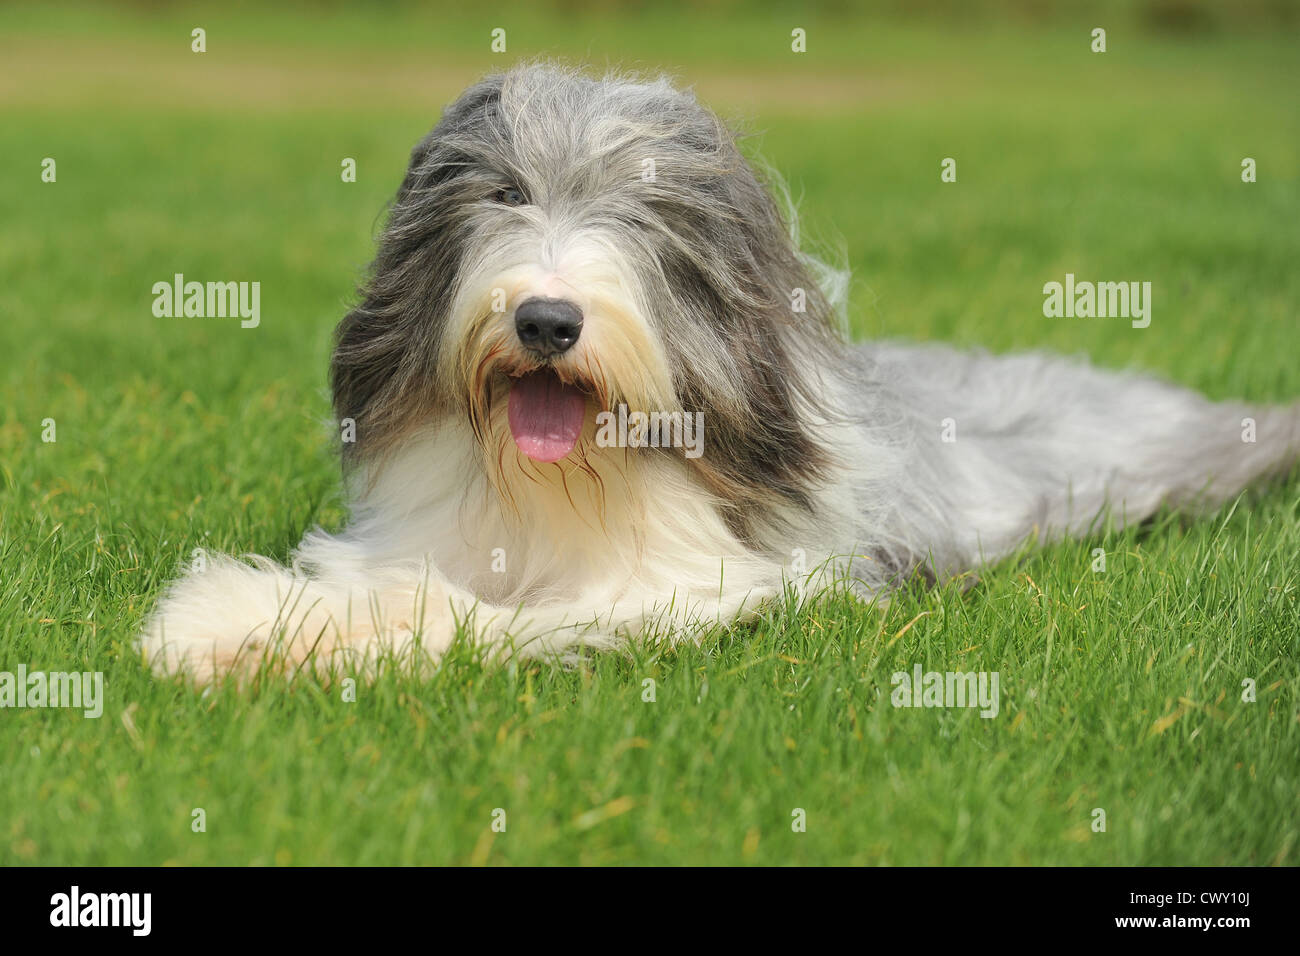 Bearded collie lying in grass Banque D'Images